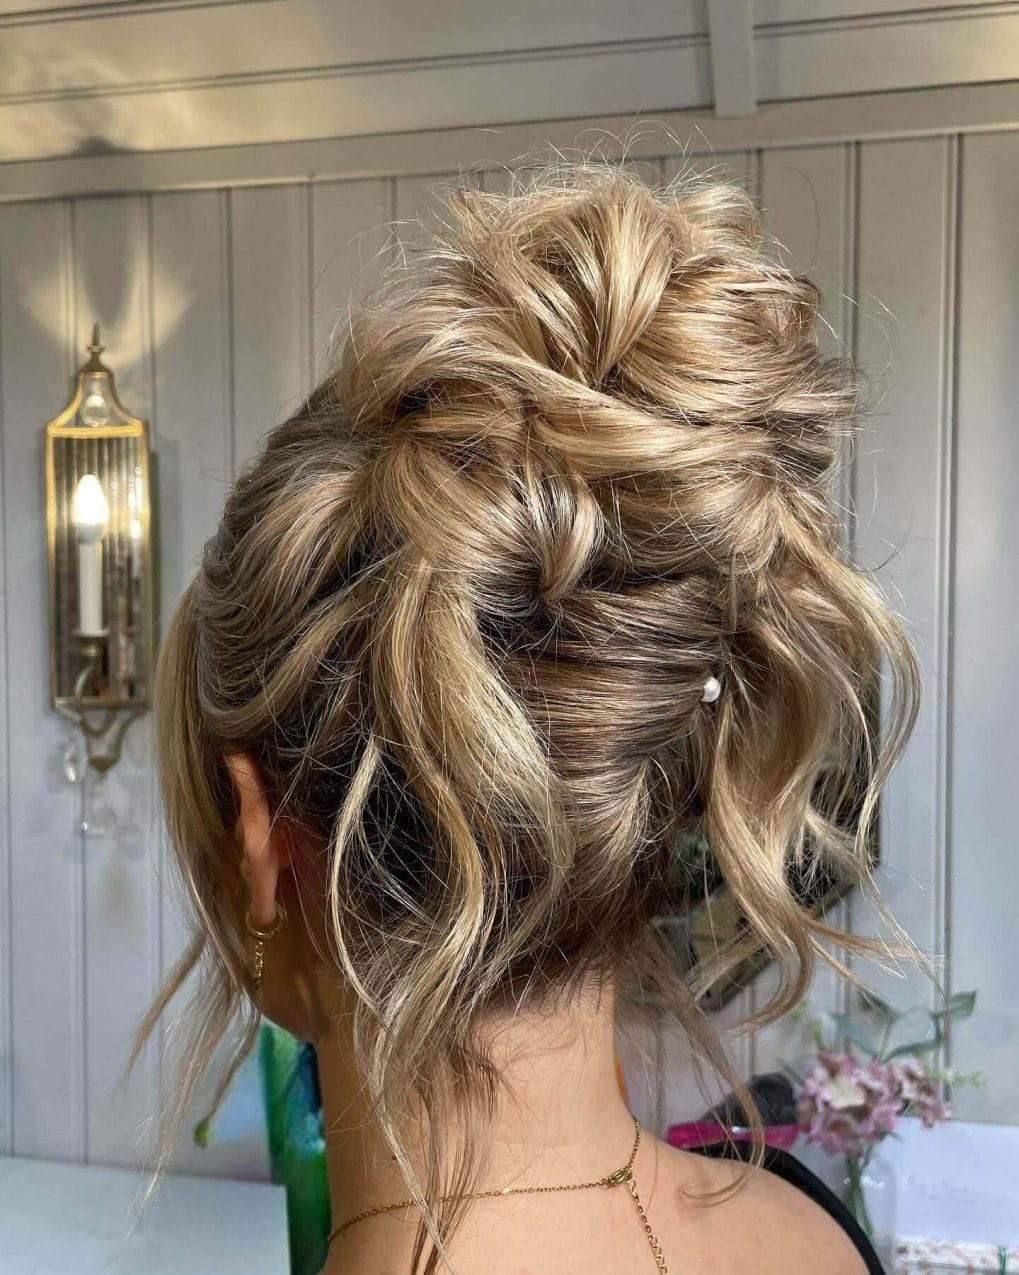 Romantic tousled high bun with golden blonde waves